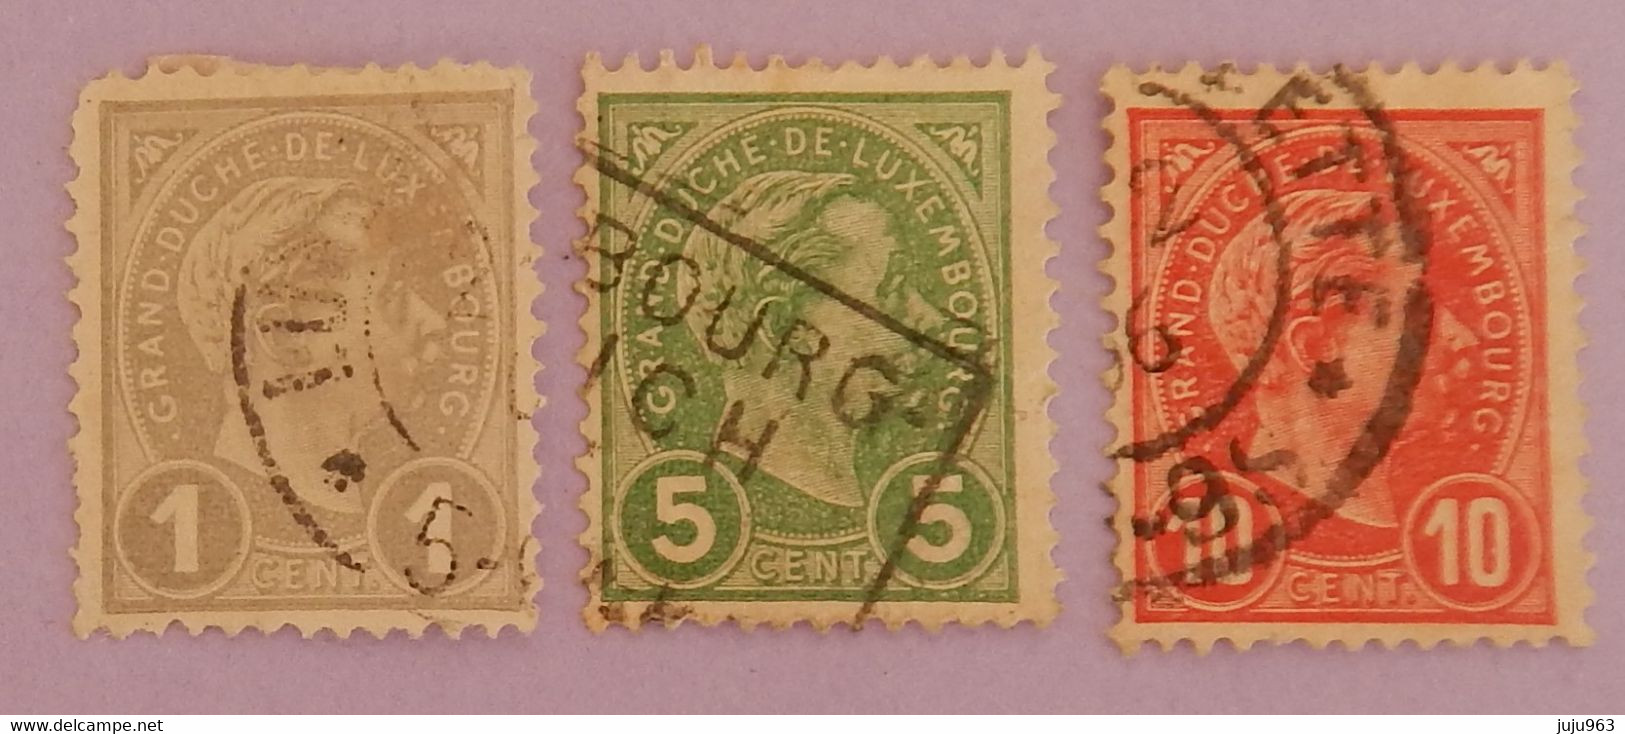 LUXEMBOURG  YT 69+72/73 OBLITERE "ADOLPHE 1ER"  ANNÉE 1895 - 1895 Adolphe Right-hand Side